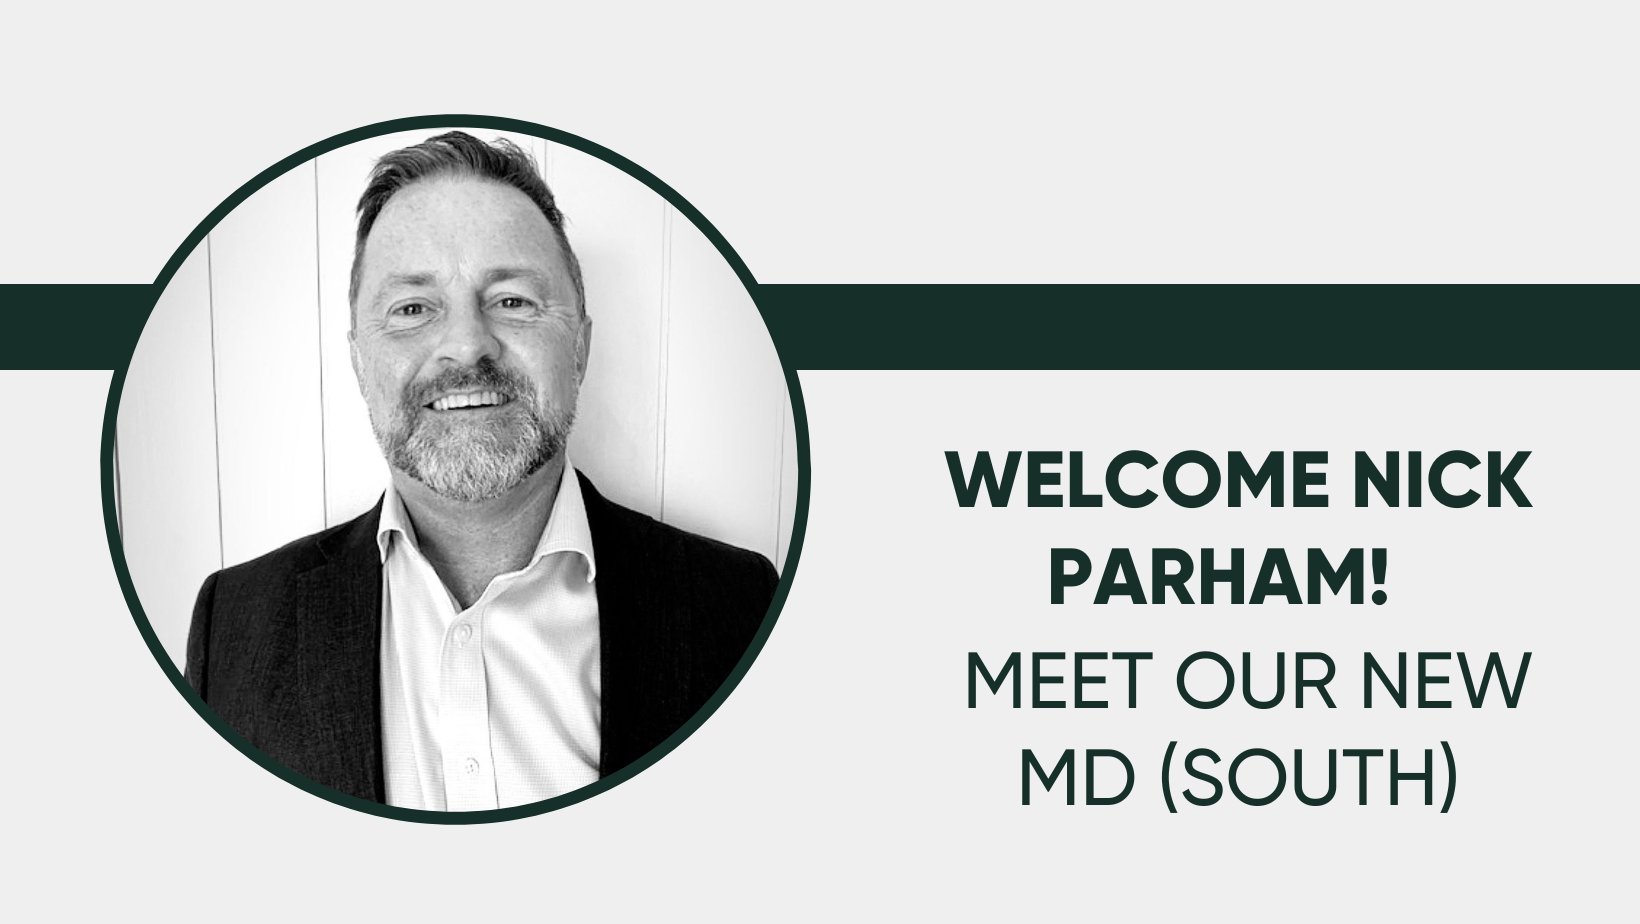 Meet our New Managing Director (South) – Nick Parham